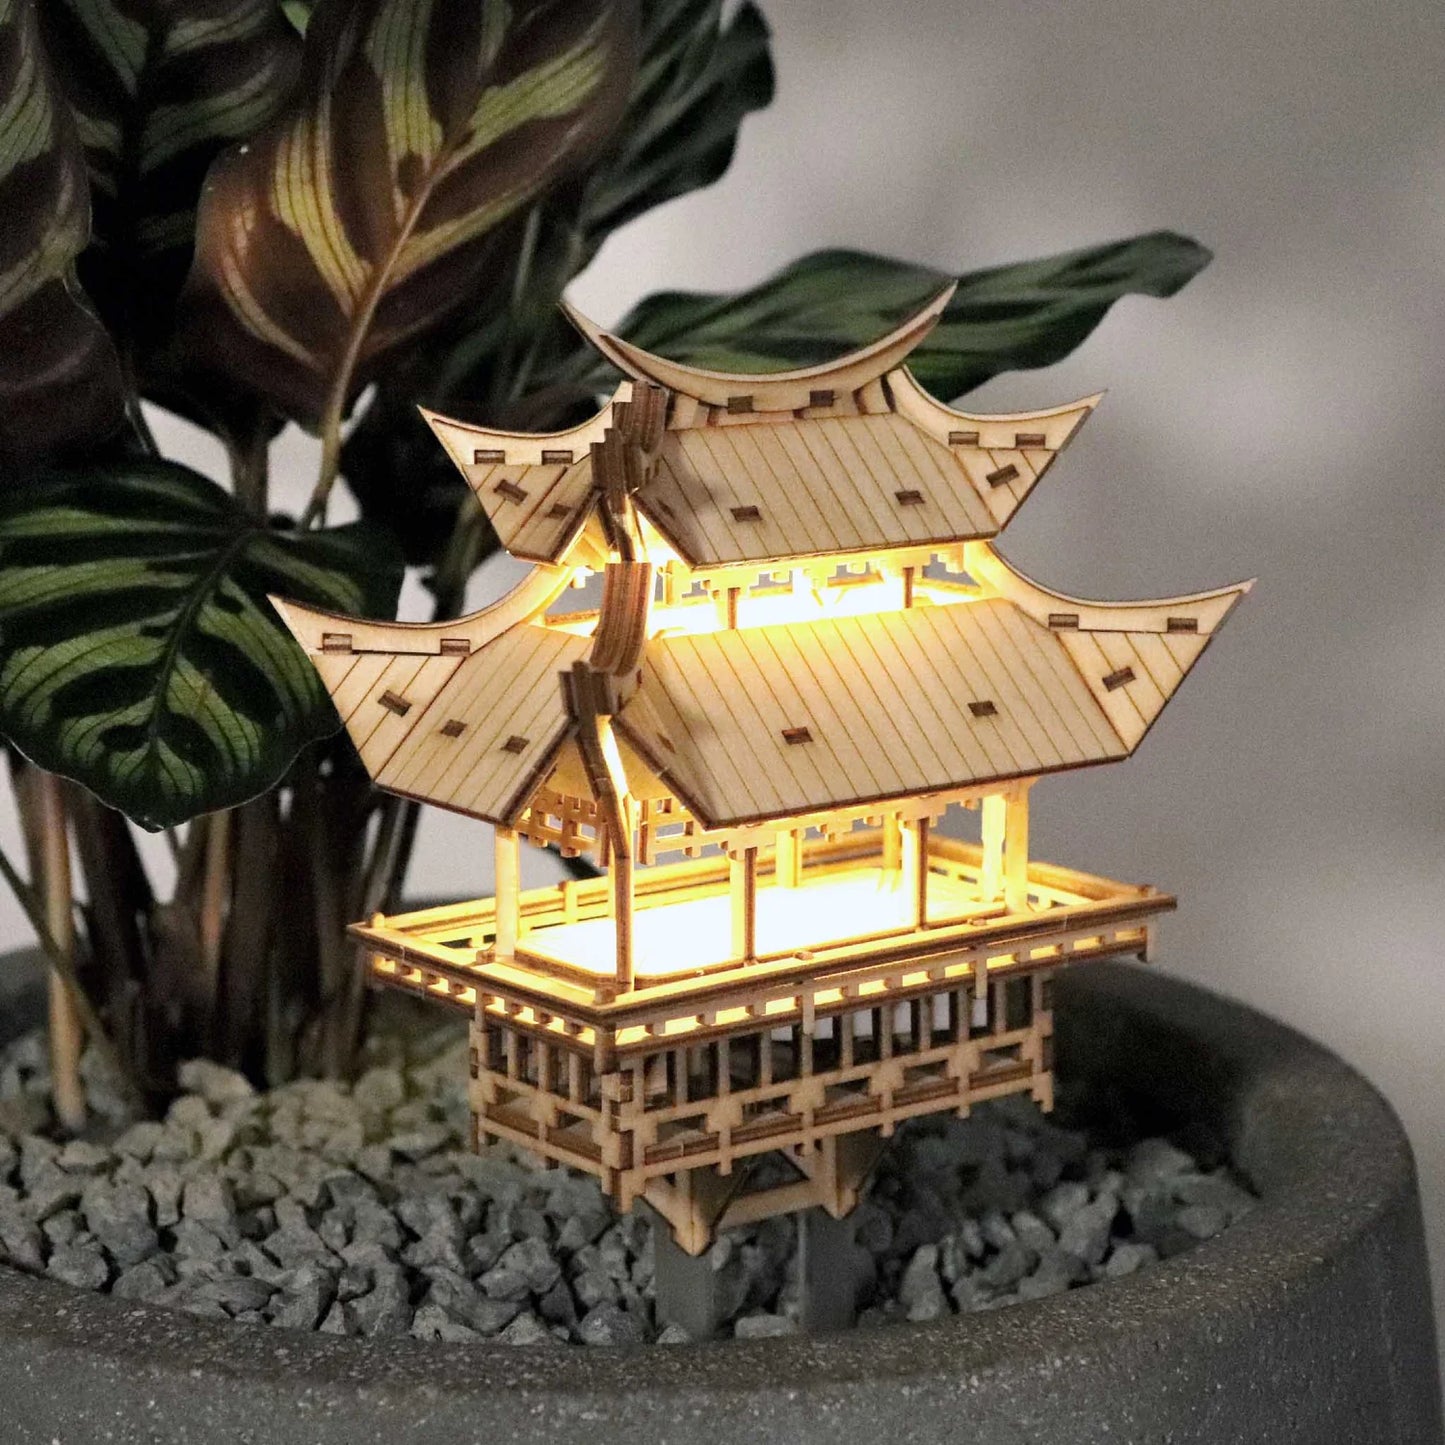 Wooden tiny treehouse with lights in potted plant